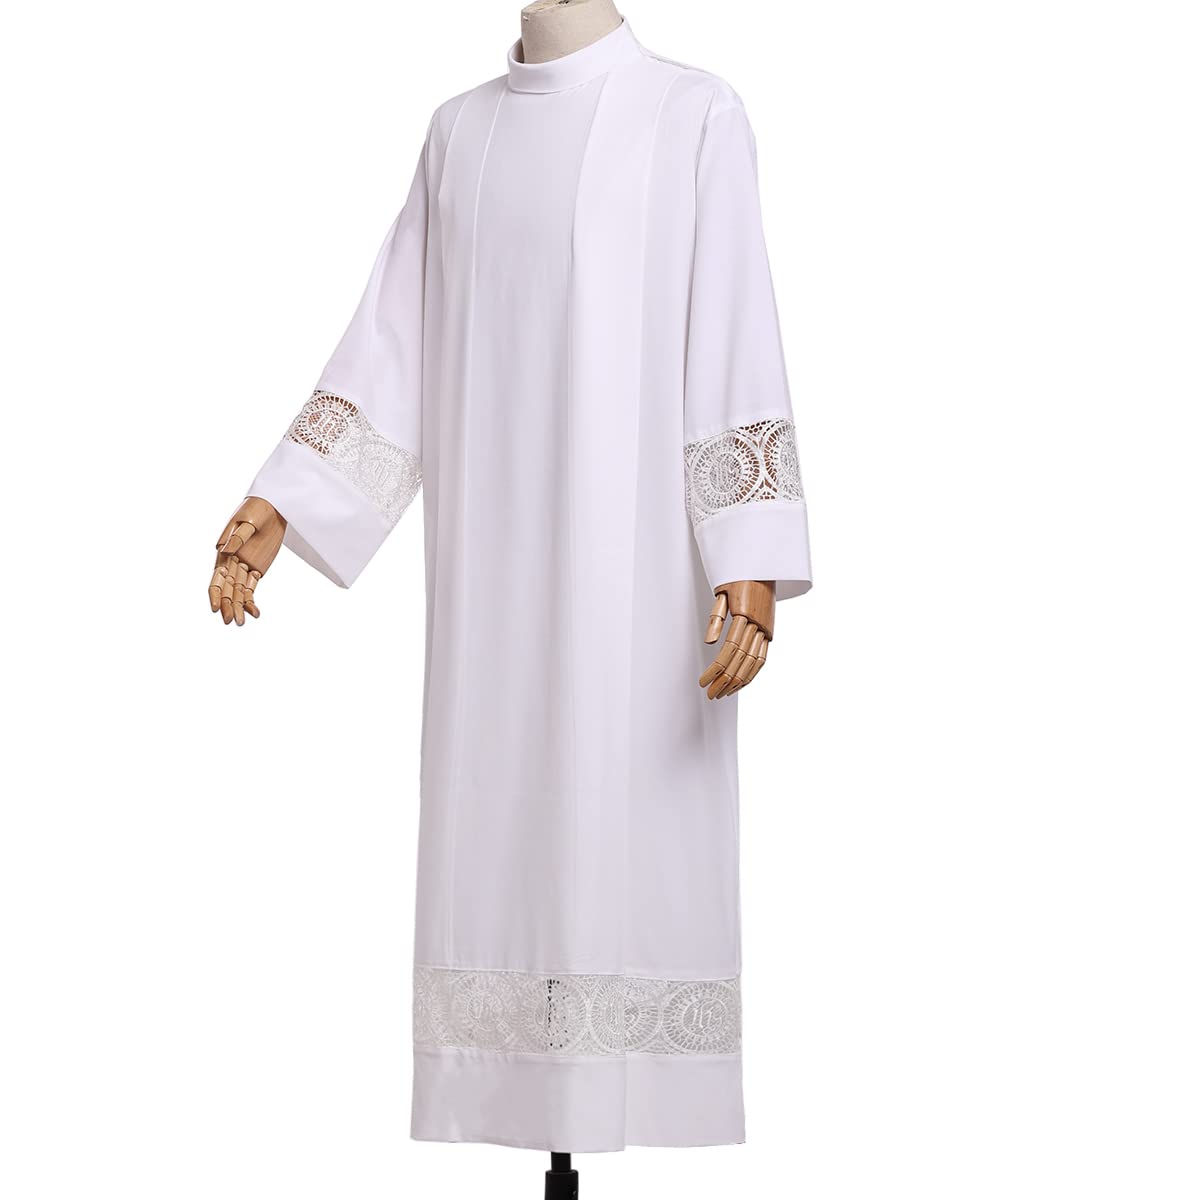 BLESSUME Catholic Priest Alb Pleated Lace Pulpit Liturgical Cotta Vestment Robe